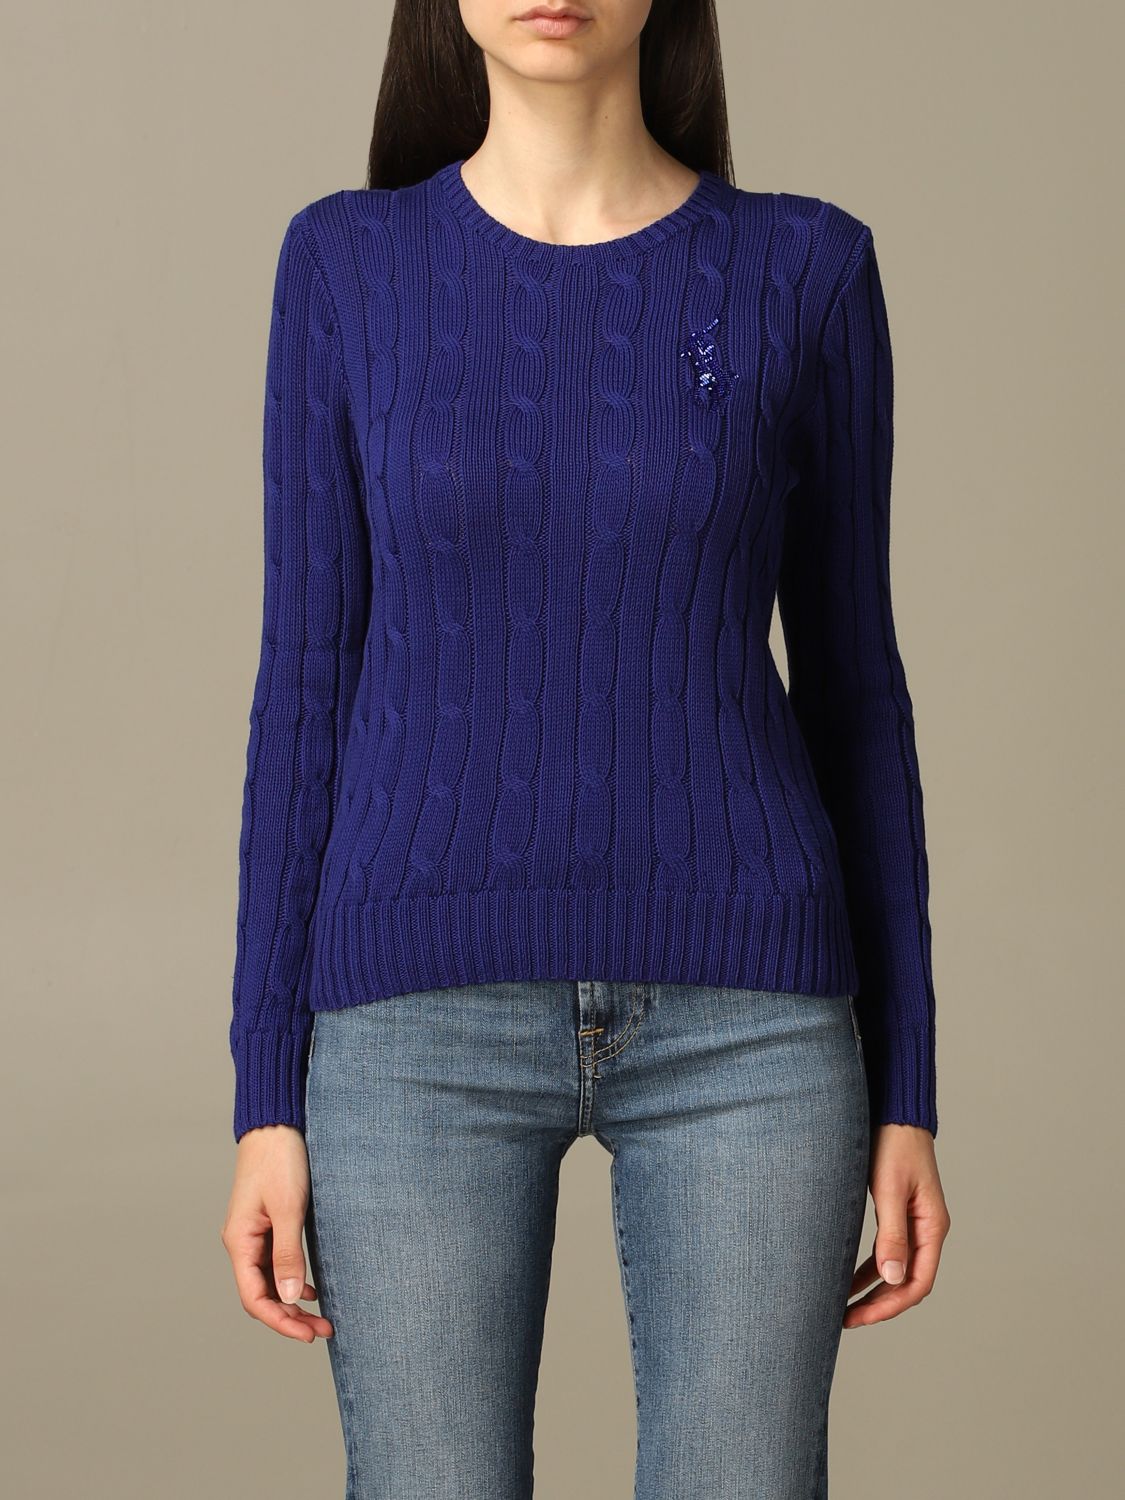 POLO RALPH LAUREN: sweater for woman - Royal Blue | Polo Ralph Lauren  sweater 211780365 online on 